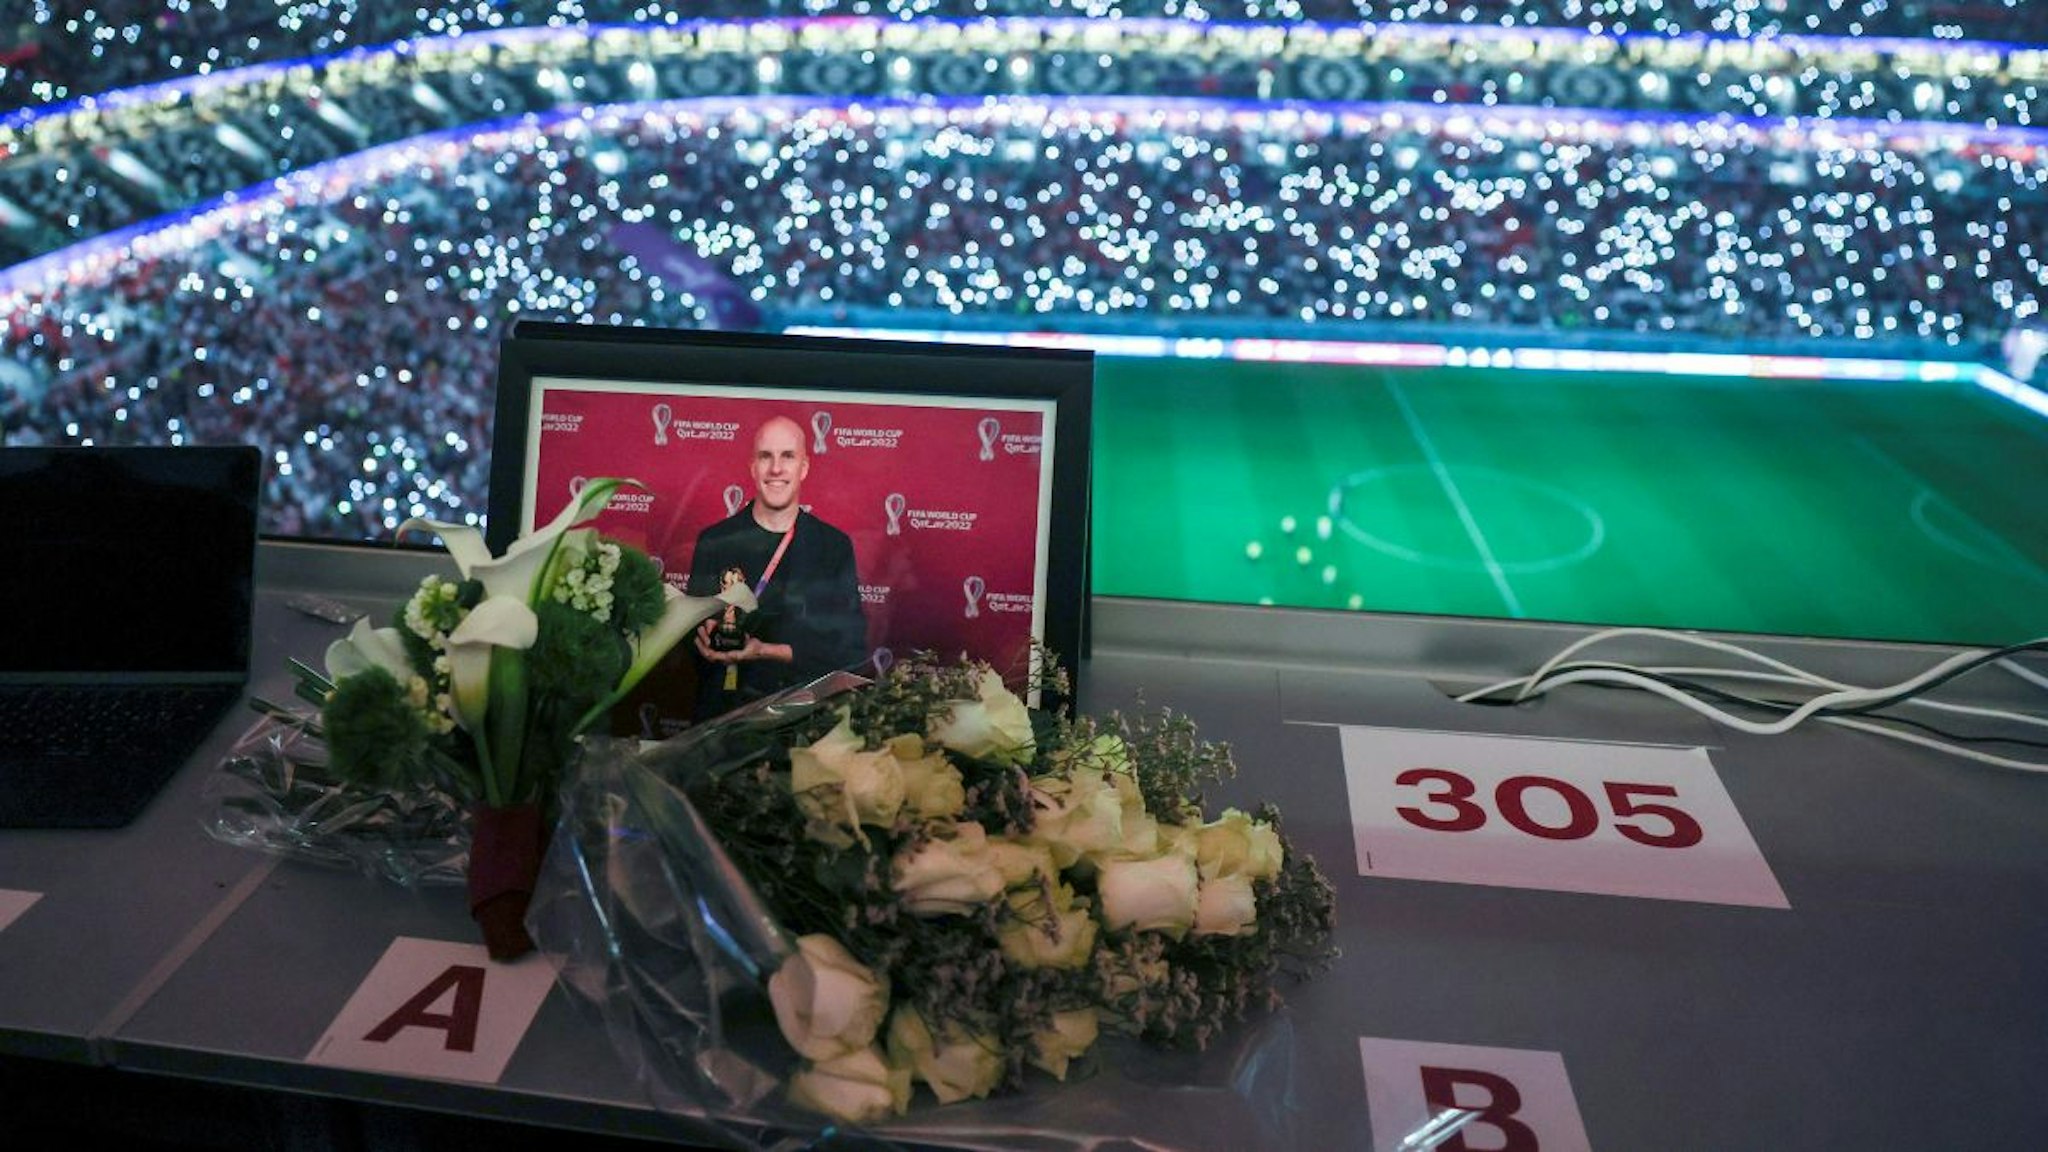 Flowers and a picture of the journalist Grant Wahl of the United States who collapsed and died in the stadium's press area while covering the match between Argentina and Netherlands are seen in the media tribune during the Quarterfinal between England and France at the 2022 FIFA World Cup at Al Bayt Stadium in Al Khor, Qatar, Dec. 10, 2022.